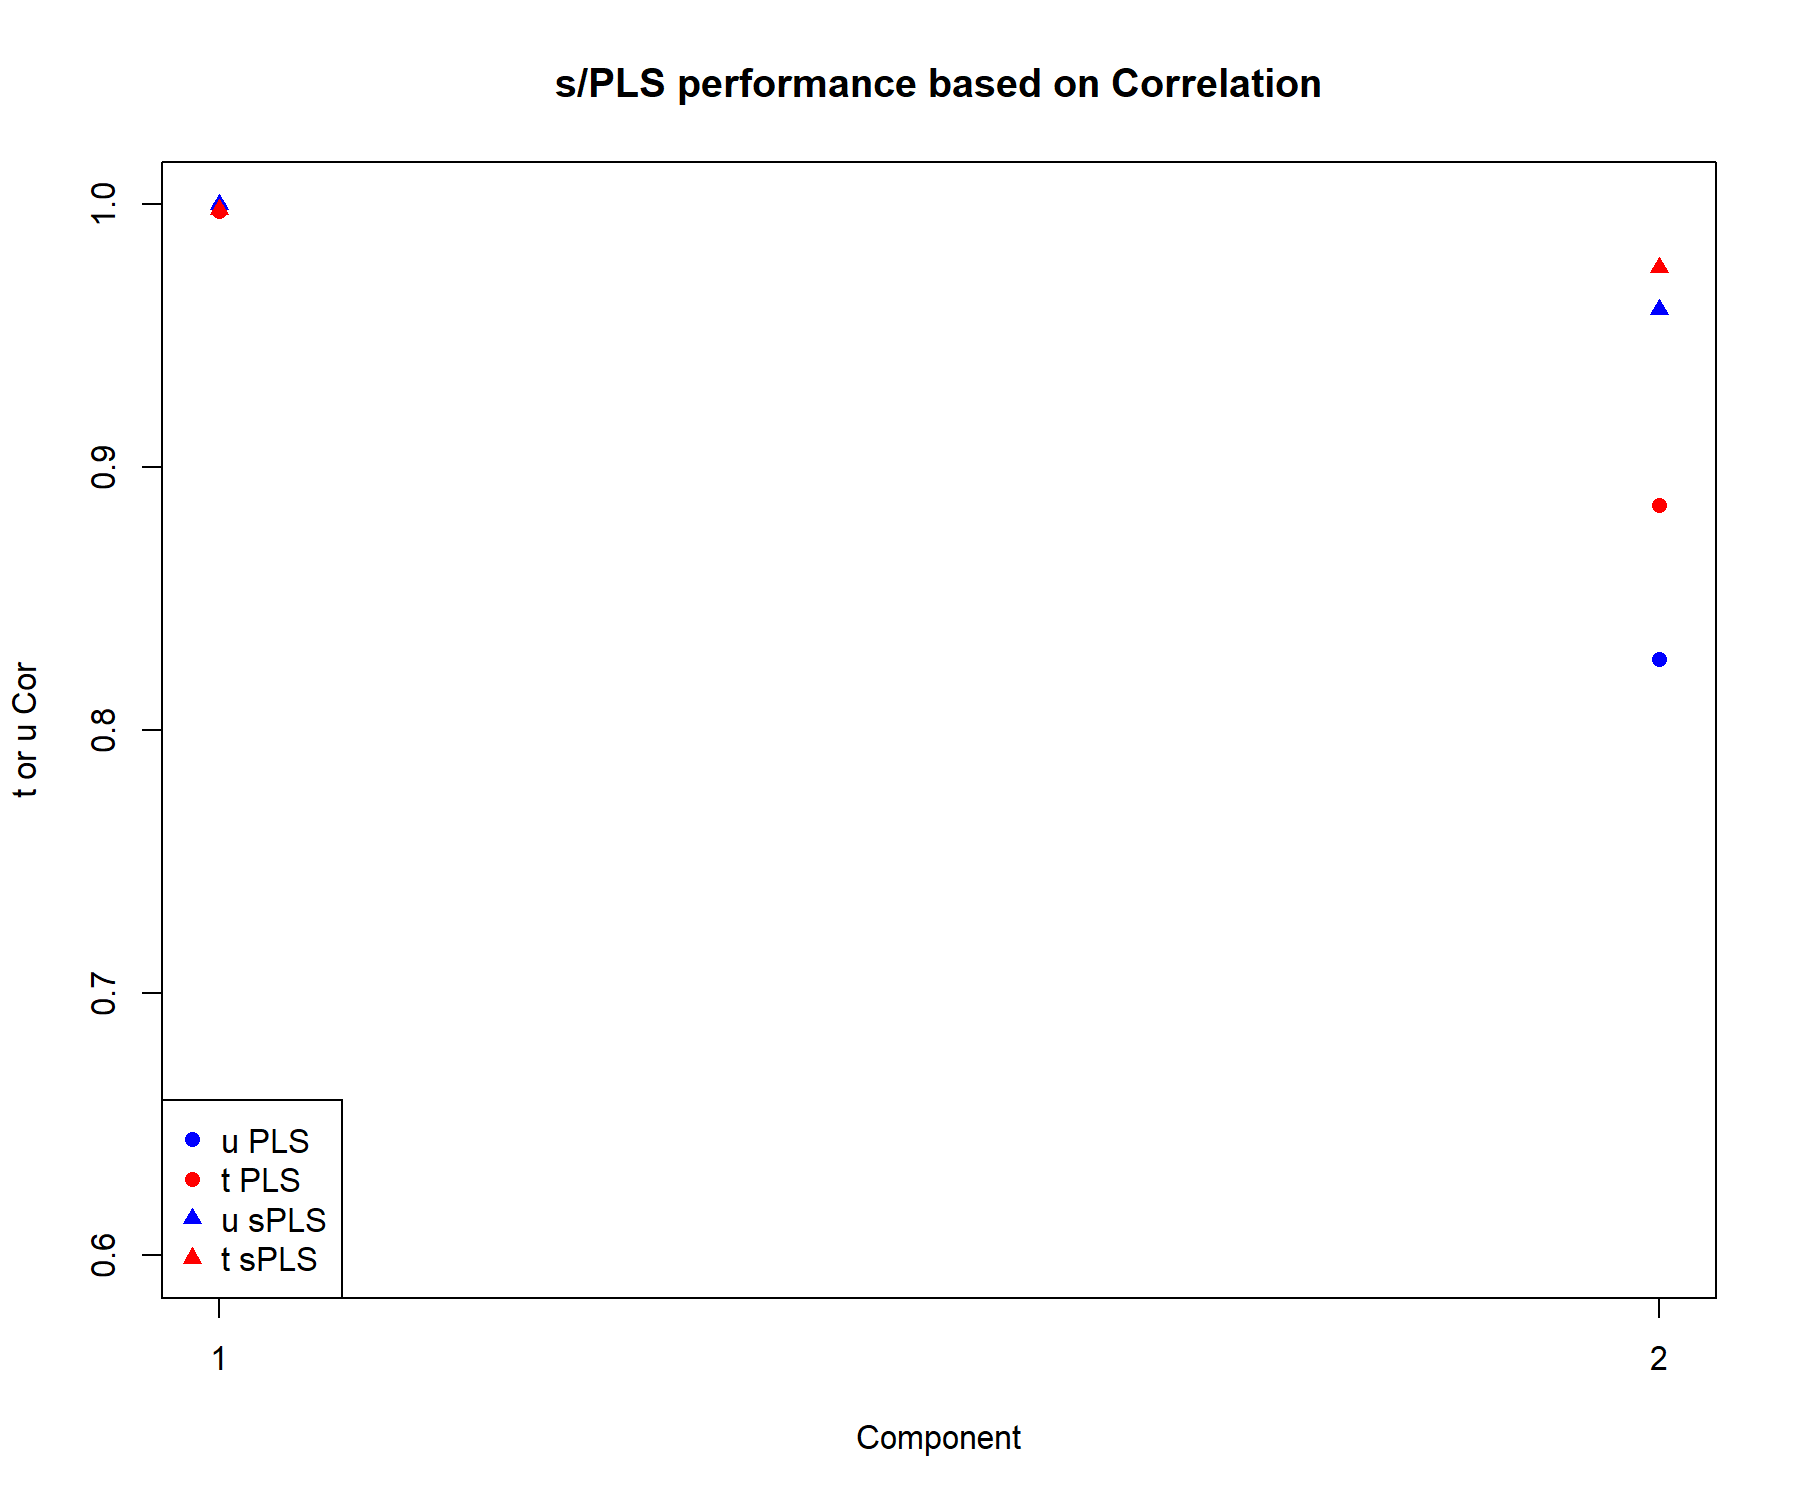 Comparison of the performance of PLS2 and sPLS2, based on the correlation between the actual and predicted components \(\boldsymbol{t,u}\) associated to each data set for each component.